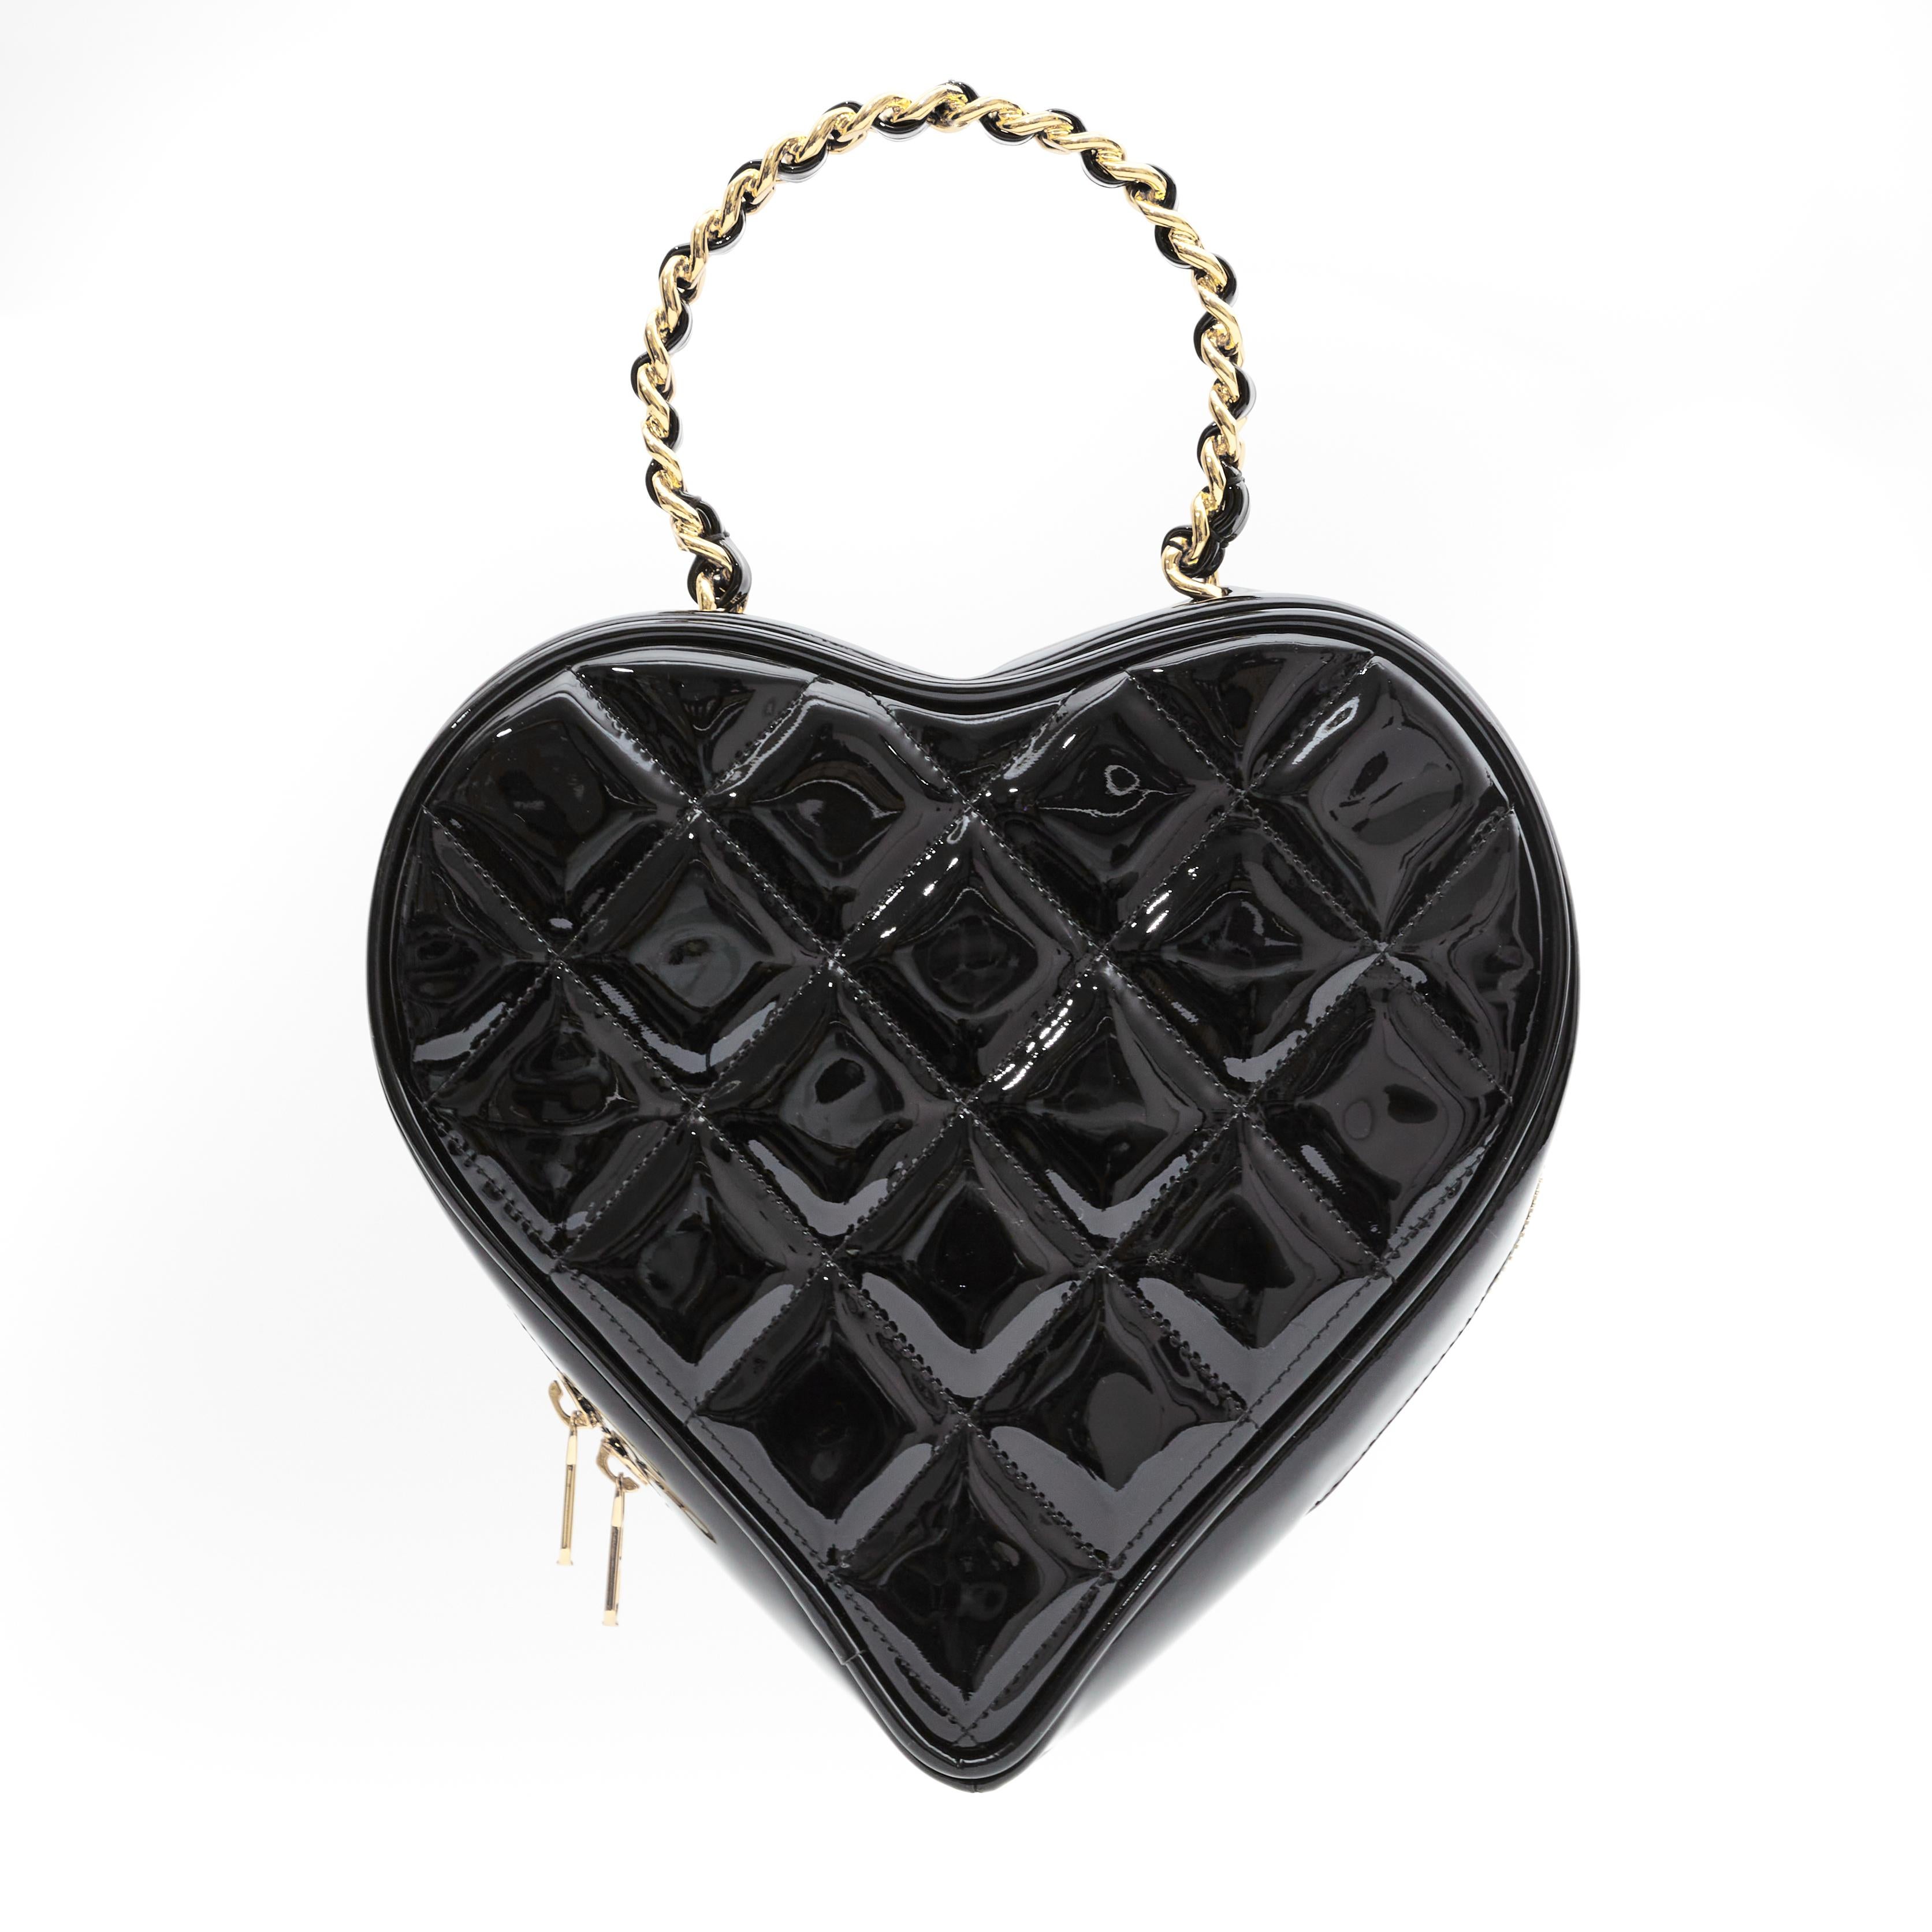 Vintage Chanel black patent quilted leather heart-shaped vanity chain handbag from 1995 collection. 
This vintage Chanel handbag is from the 1995 collection and is made with patent calfskin leather with diamond quilting. The bag features gold-tone